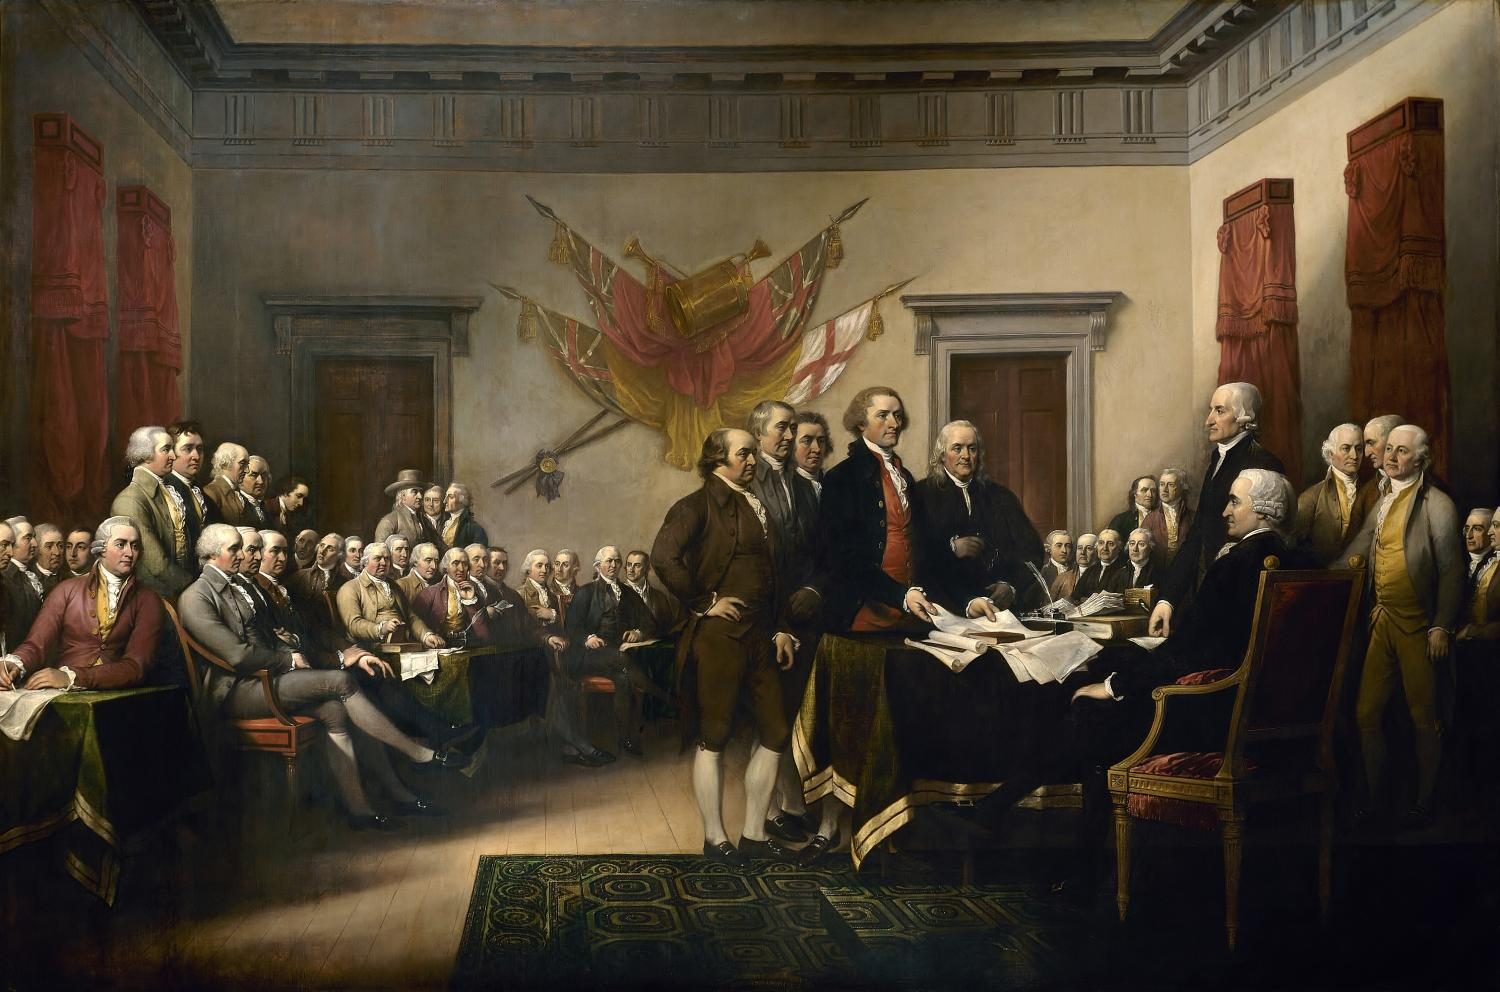 Presenting a draft of the Declaration of Independence, fifty men are circled around the room in John Trumbull’s famous painting fittingly titled “Declaration of Independence.” Recently, a parchment of the Declaration of Independence was discovered in the United Kingdom by Danielle Allen and Emily Sneff.